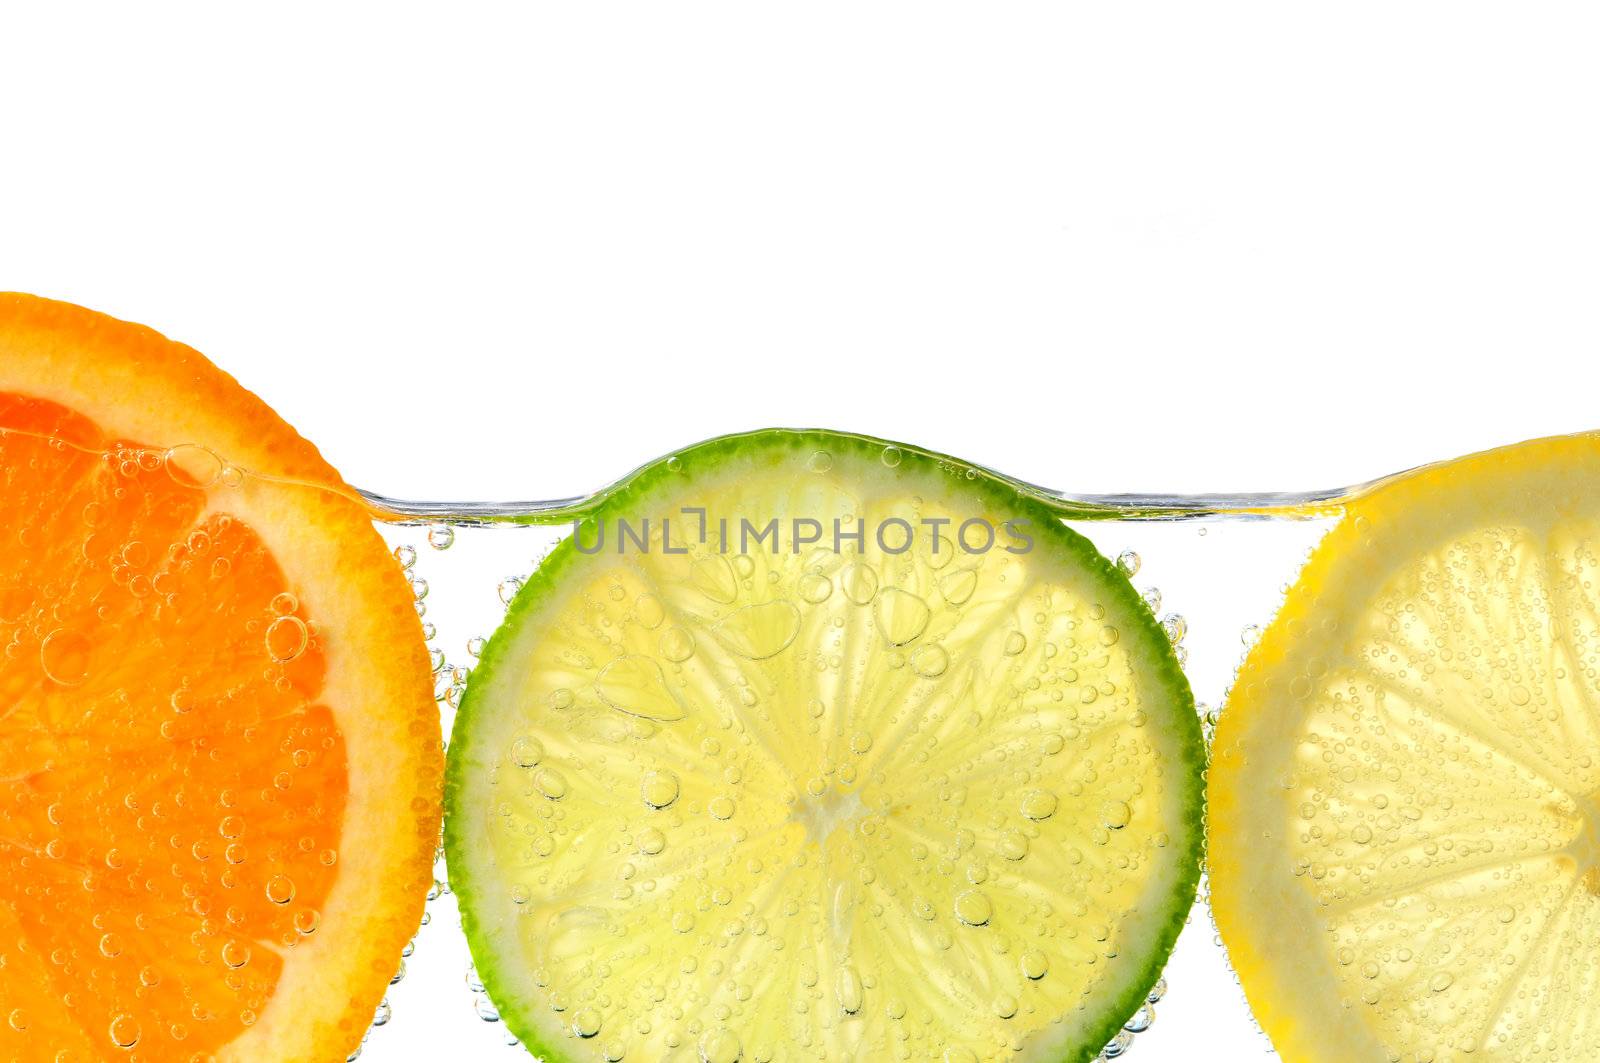 Orange lemon and lime slices in water by elenathewise